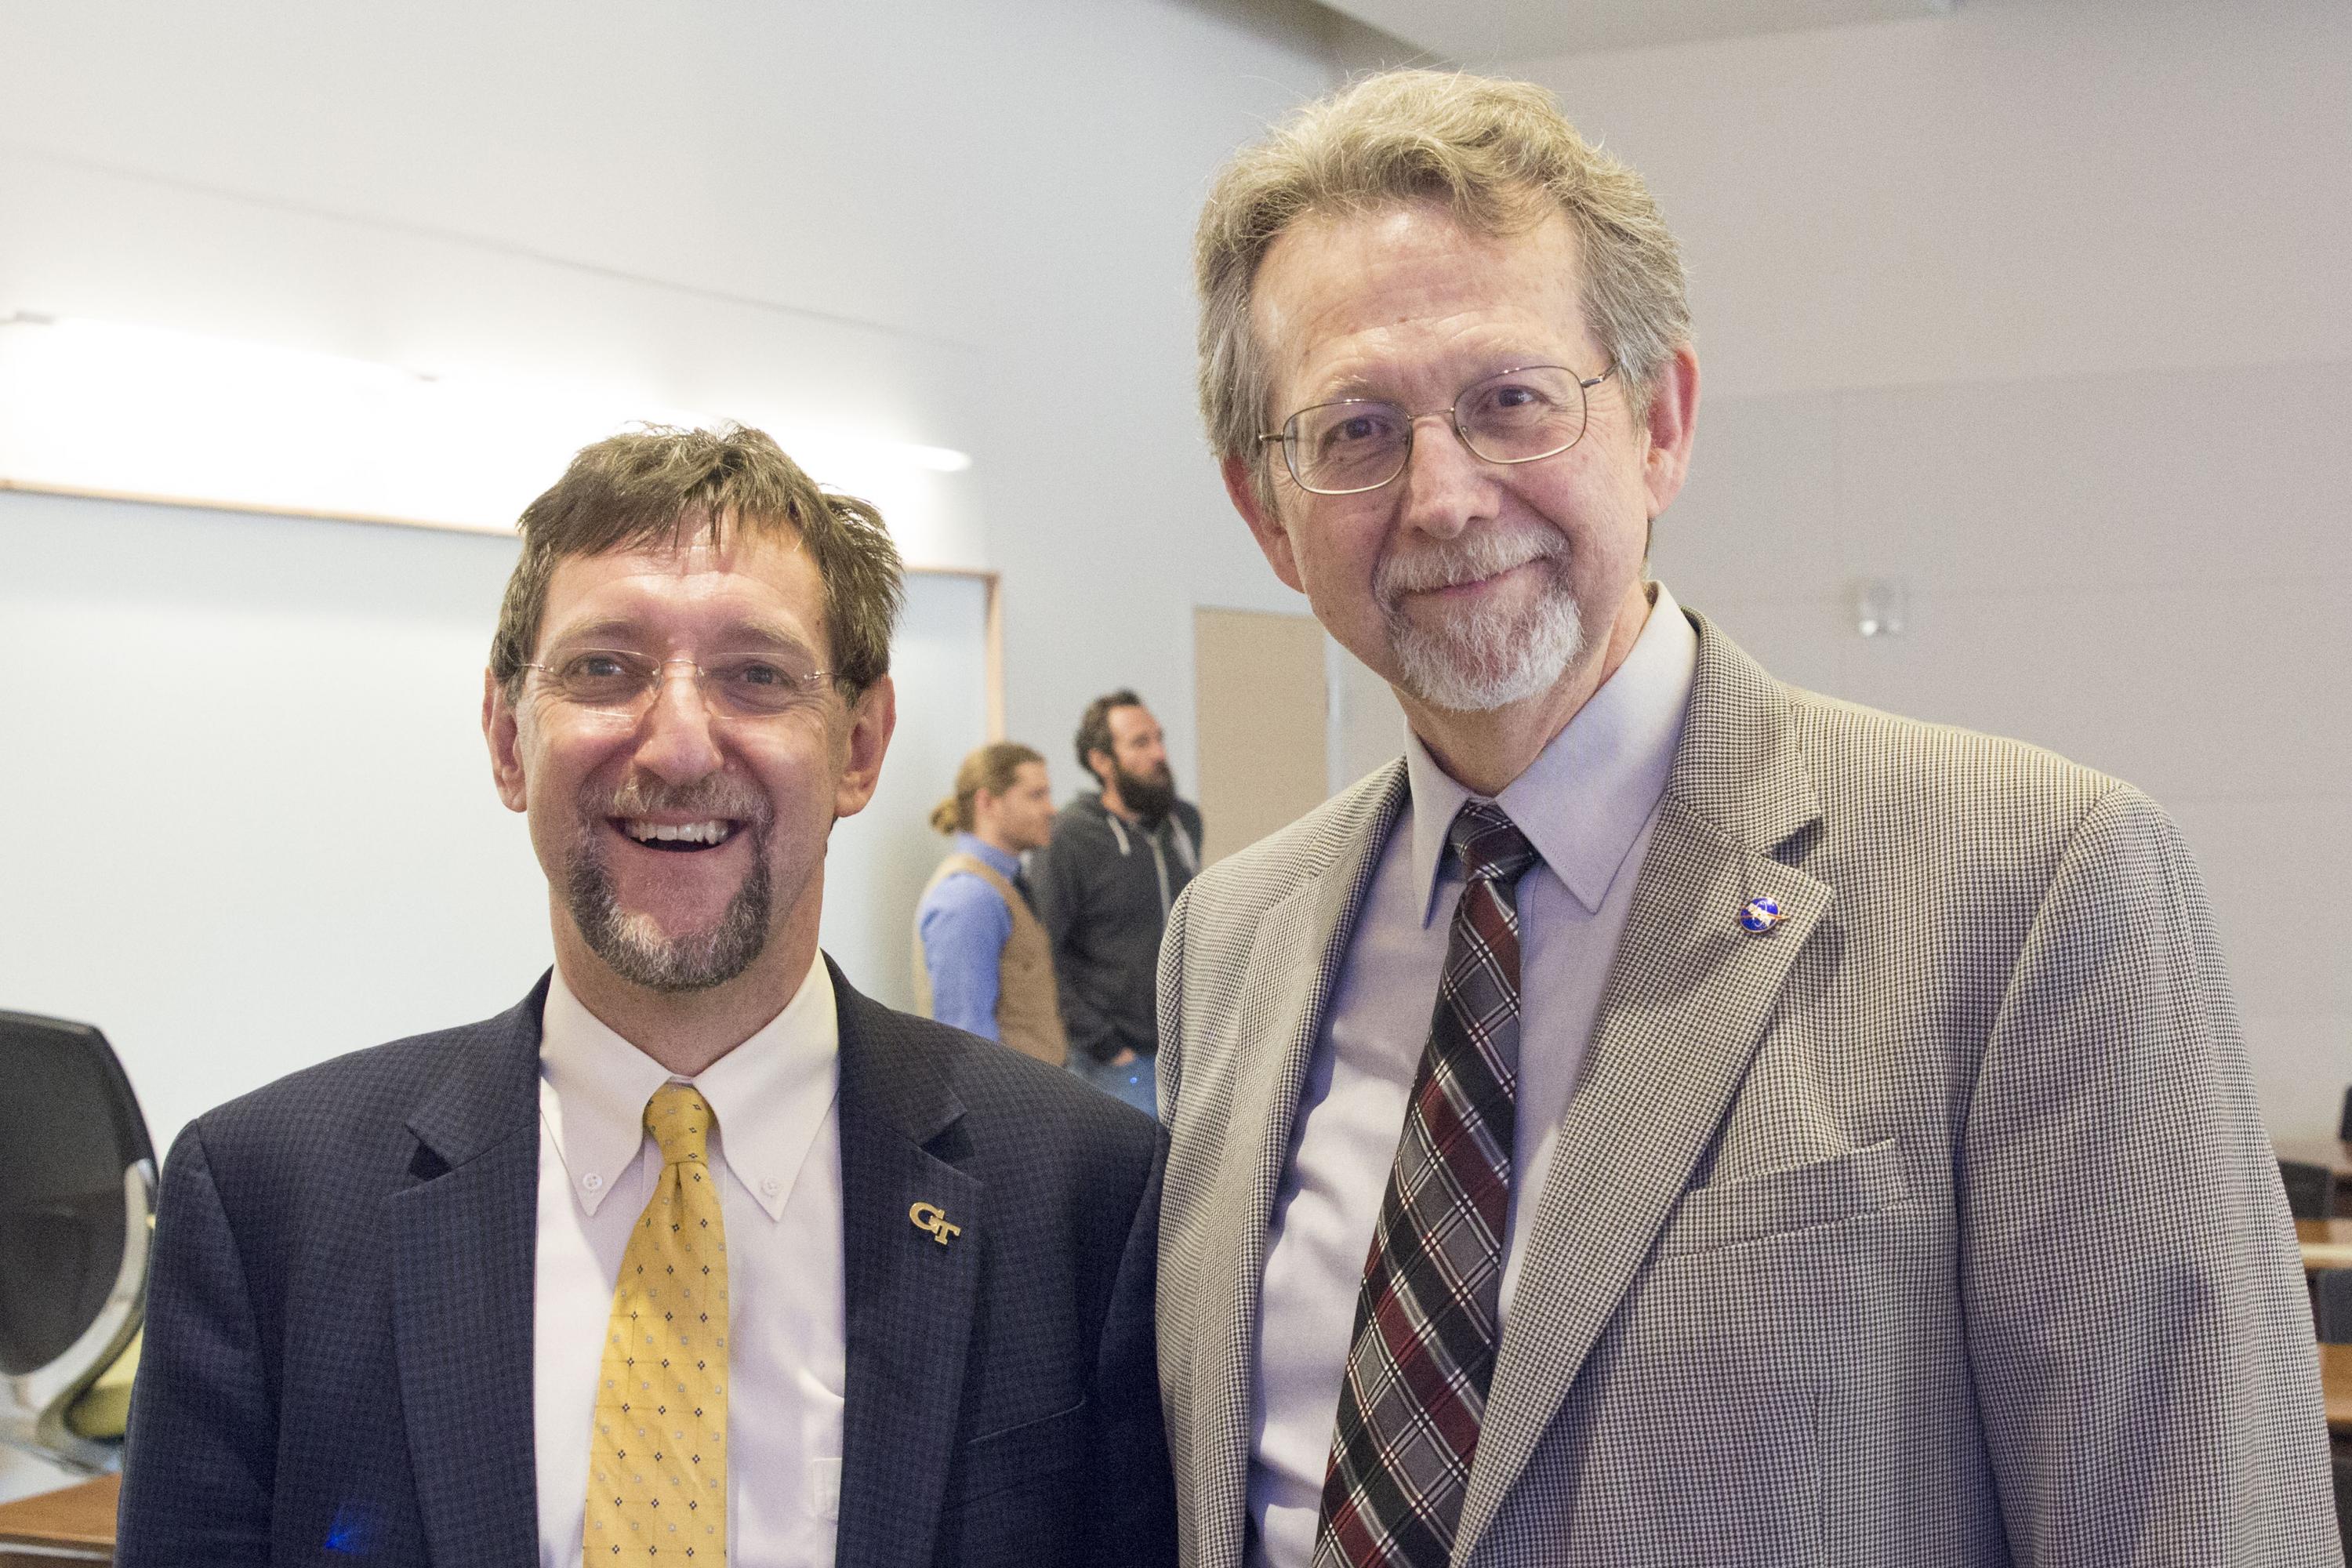 NASA's James Green with College of Sciences Dean Paul Goldbart (Febuary 20, 2017).